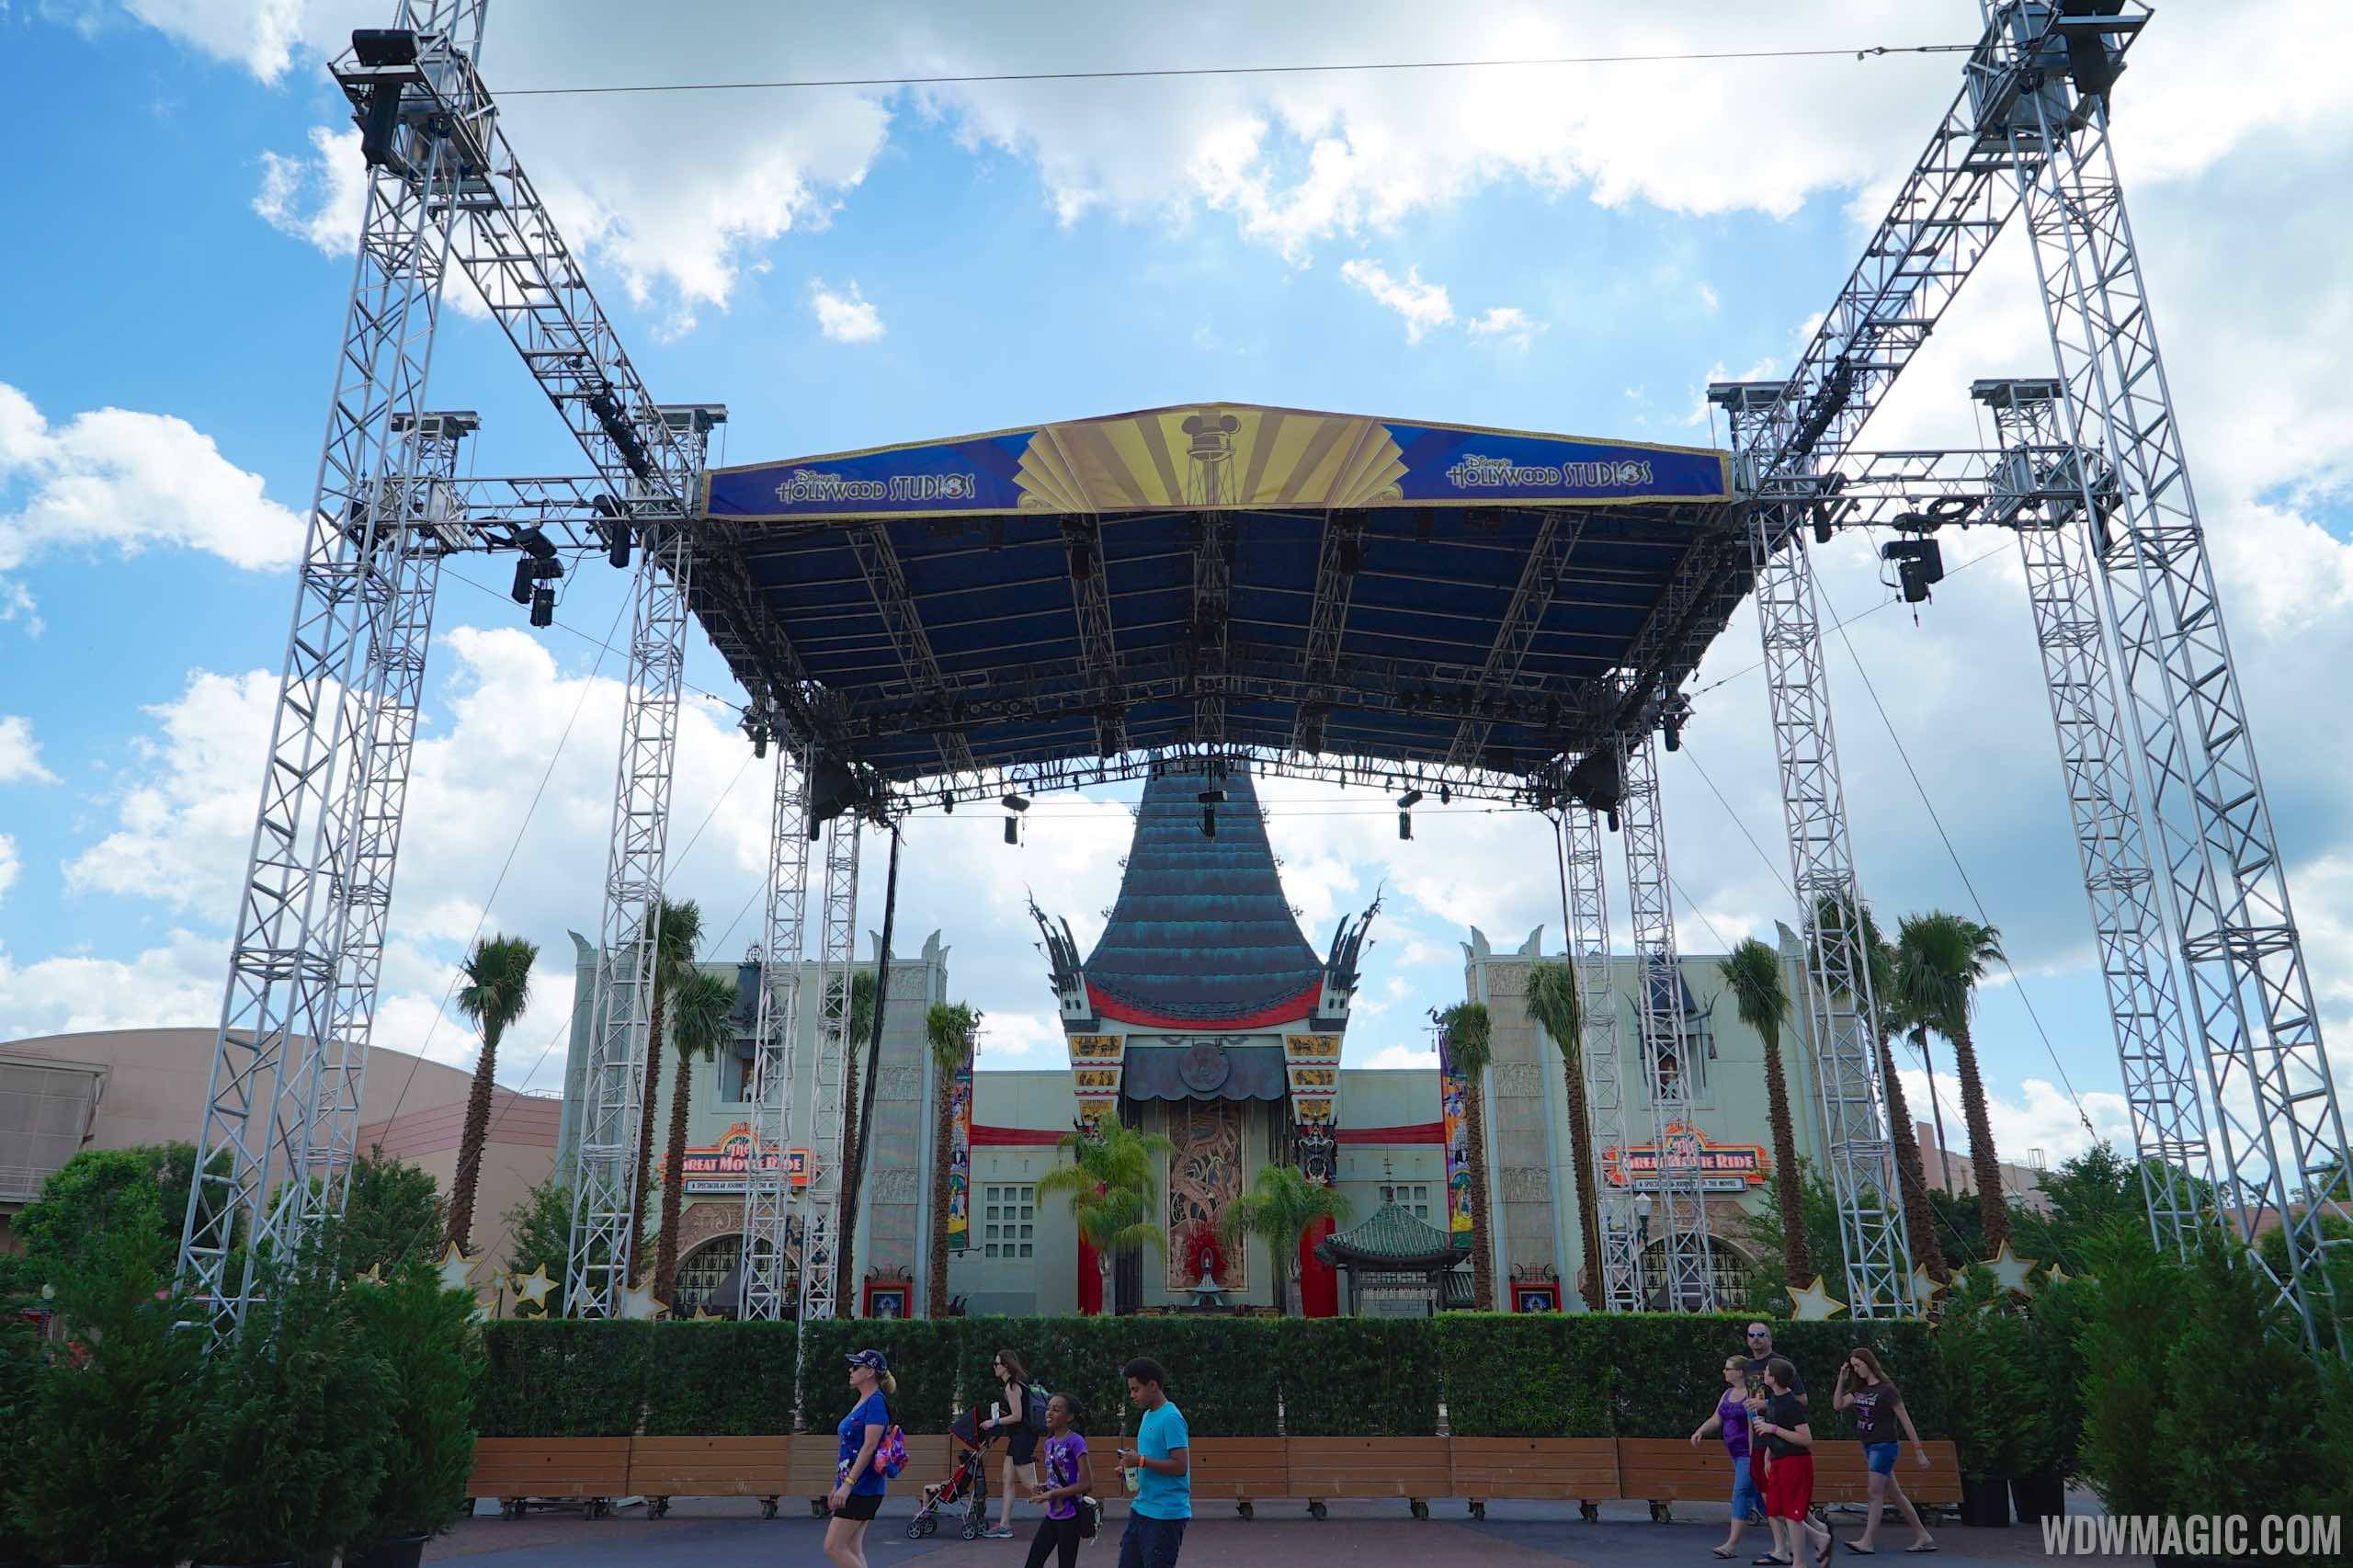 PHOTOS - Center Stage area taking shape at Disney's Hollywood Studios